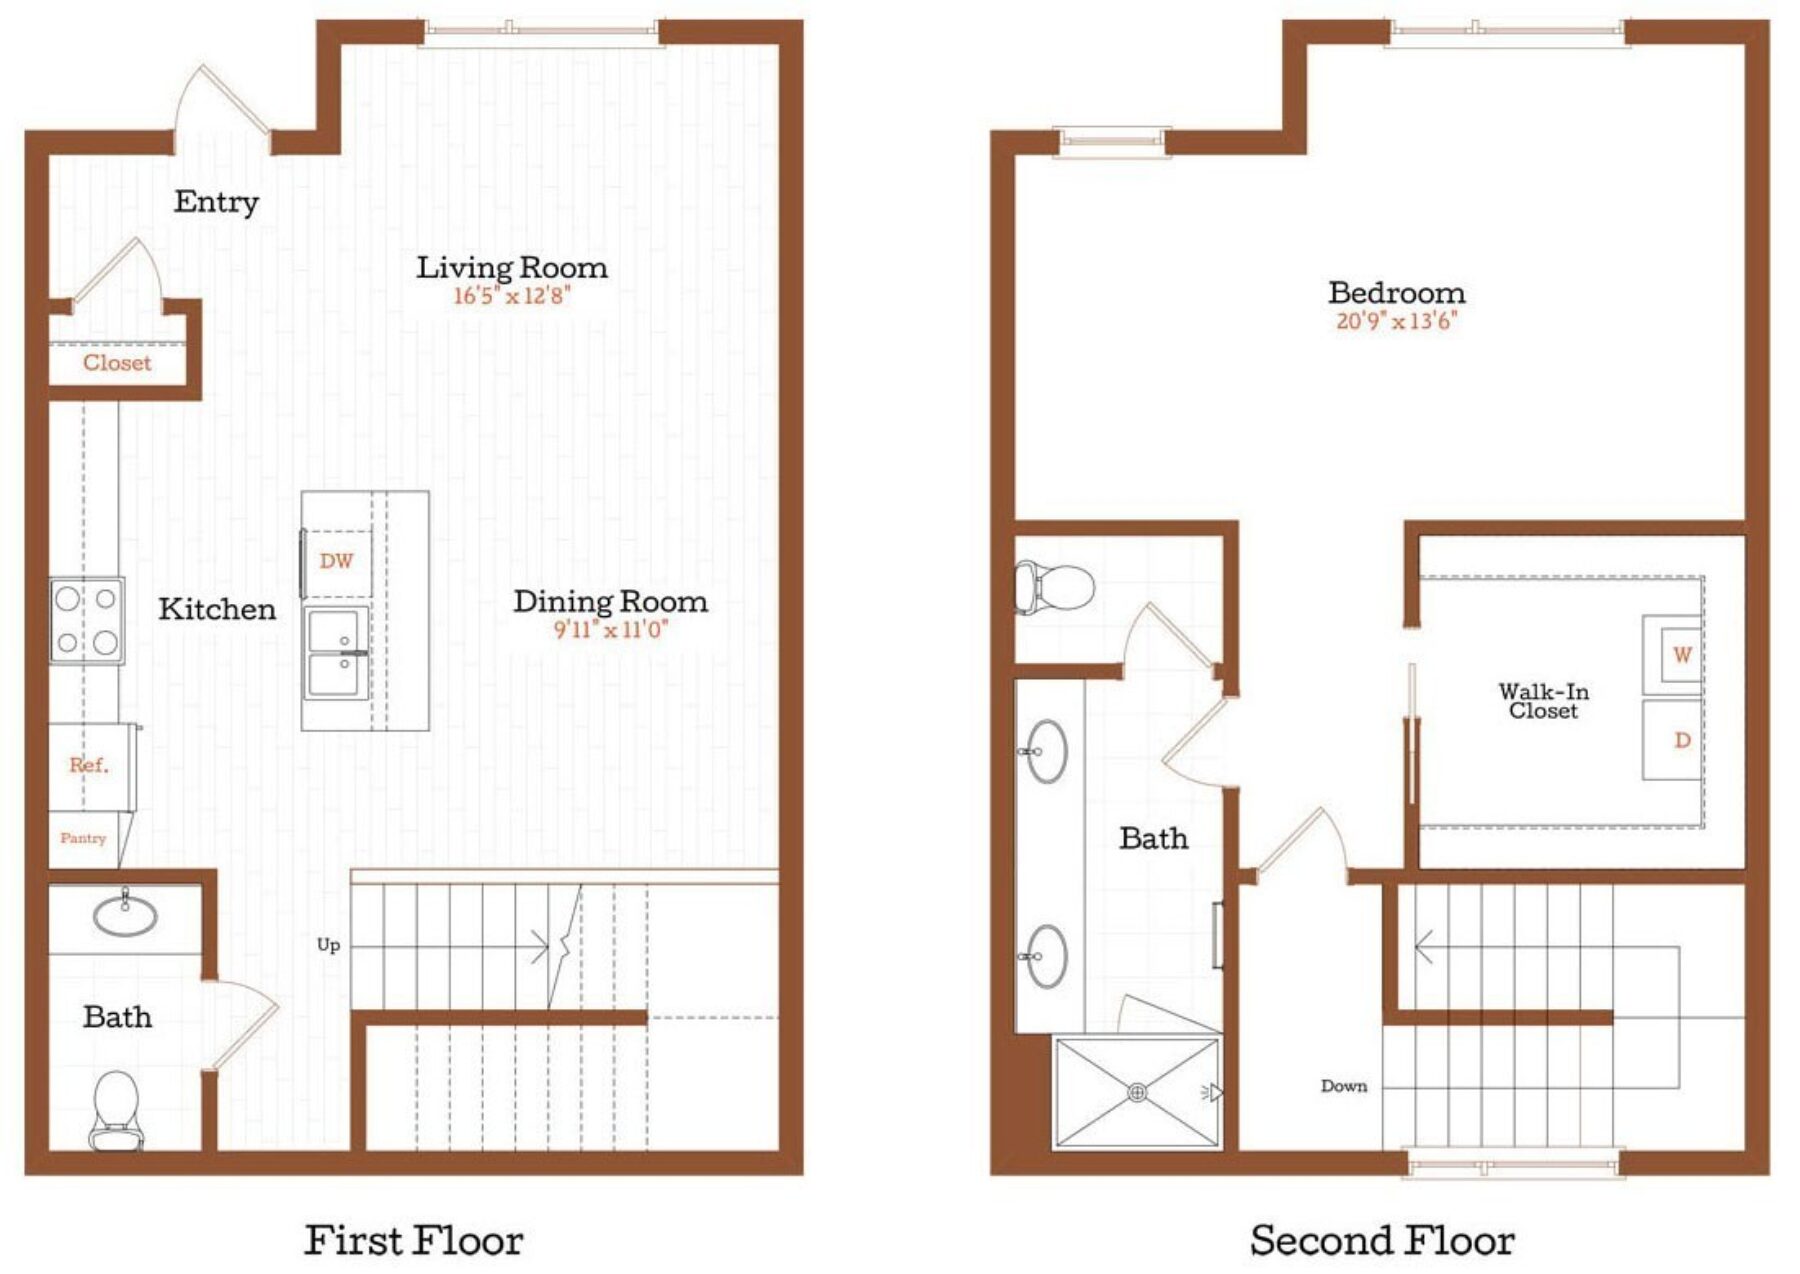 Plan Image: TH2 - Townhome